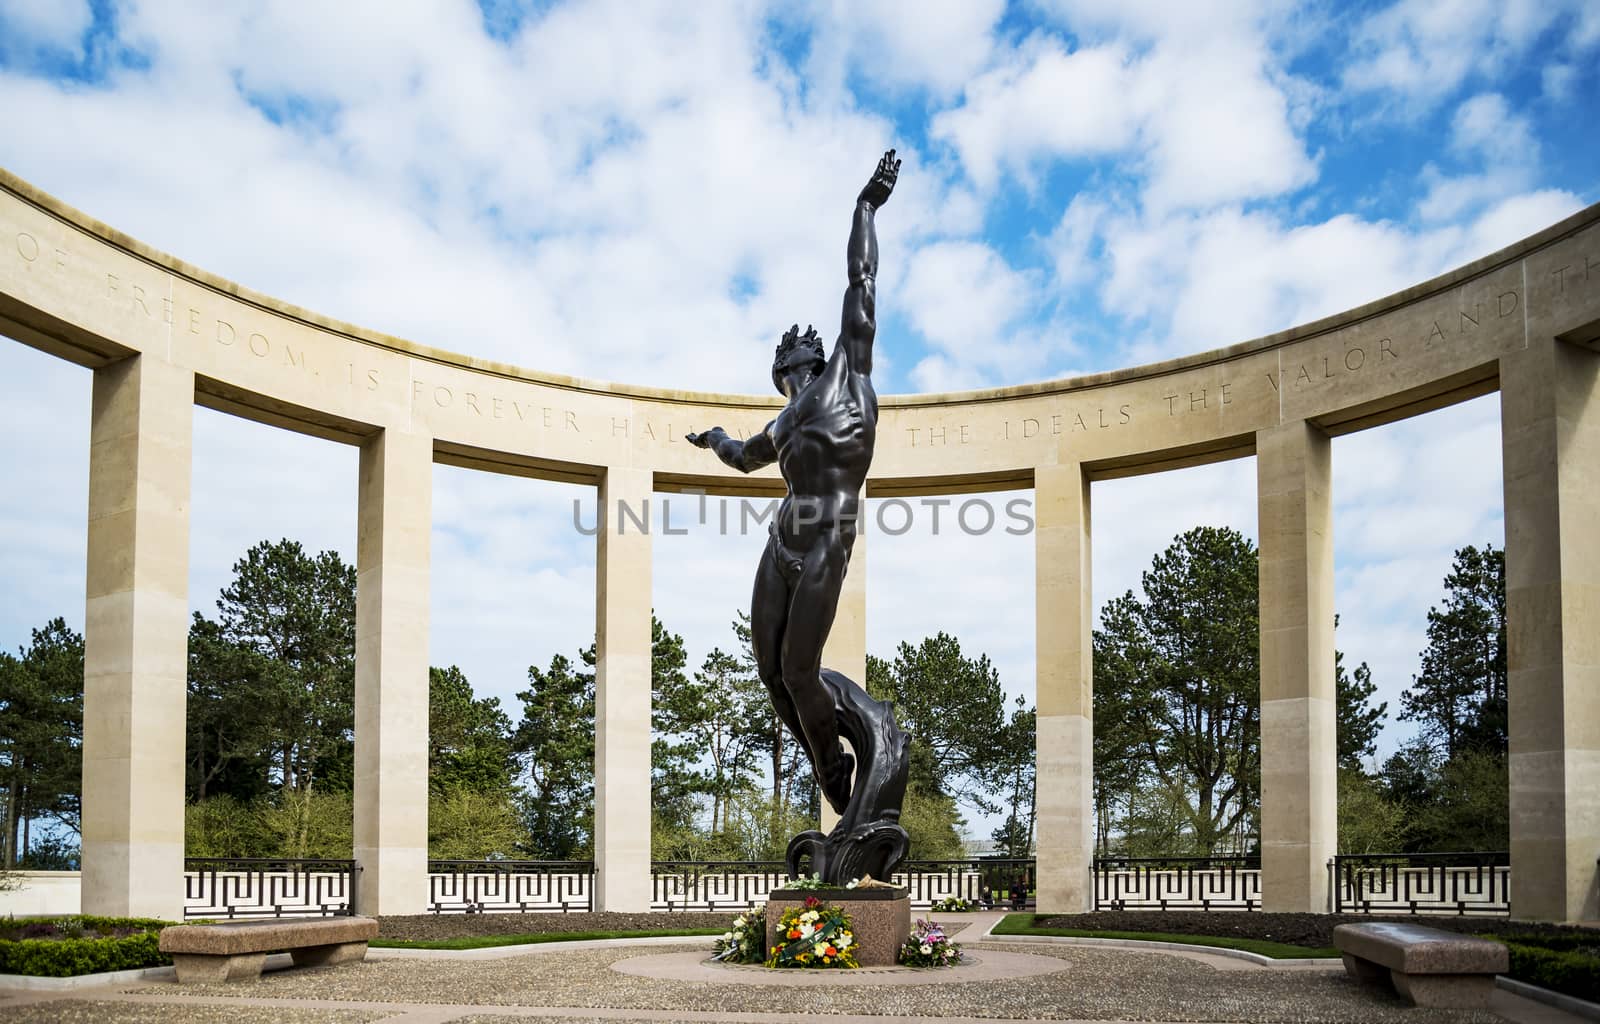 COLLEVILLE SUR MER - APRIL 6: Memorial in American cemetery near Omaha Beach, April 6, 2015 in Colleville sur Mer, Normandy, France